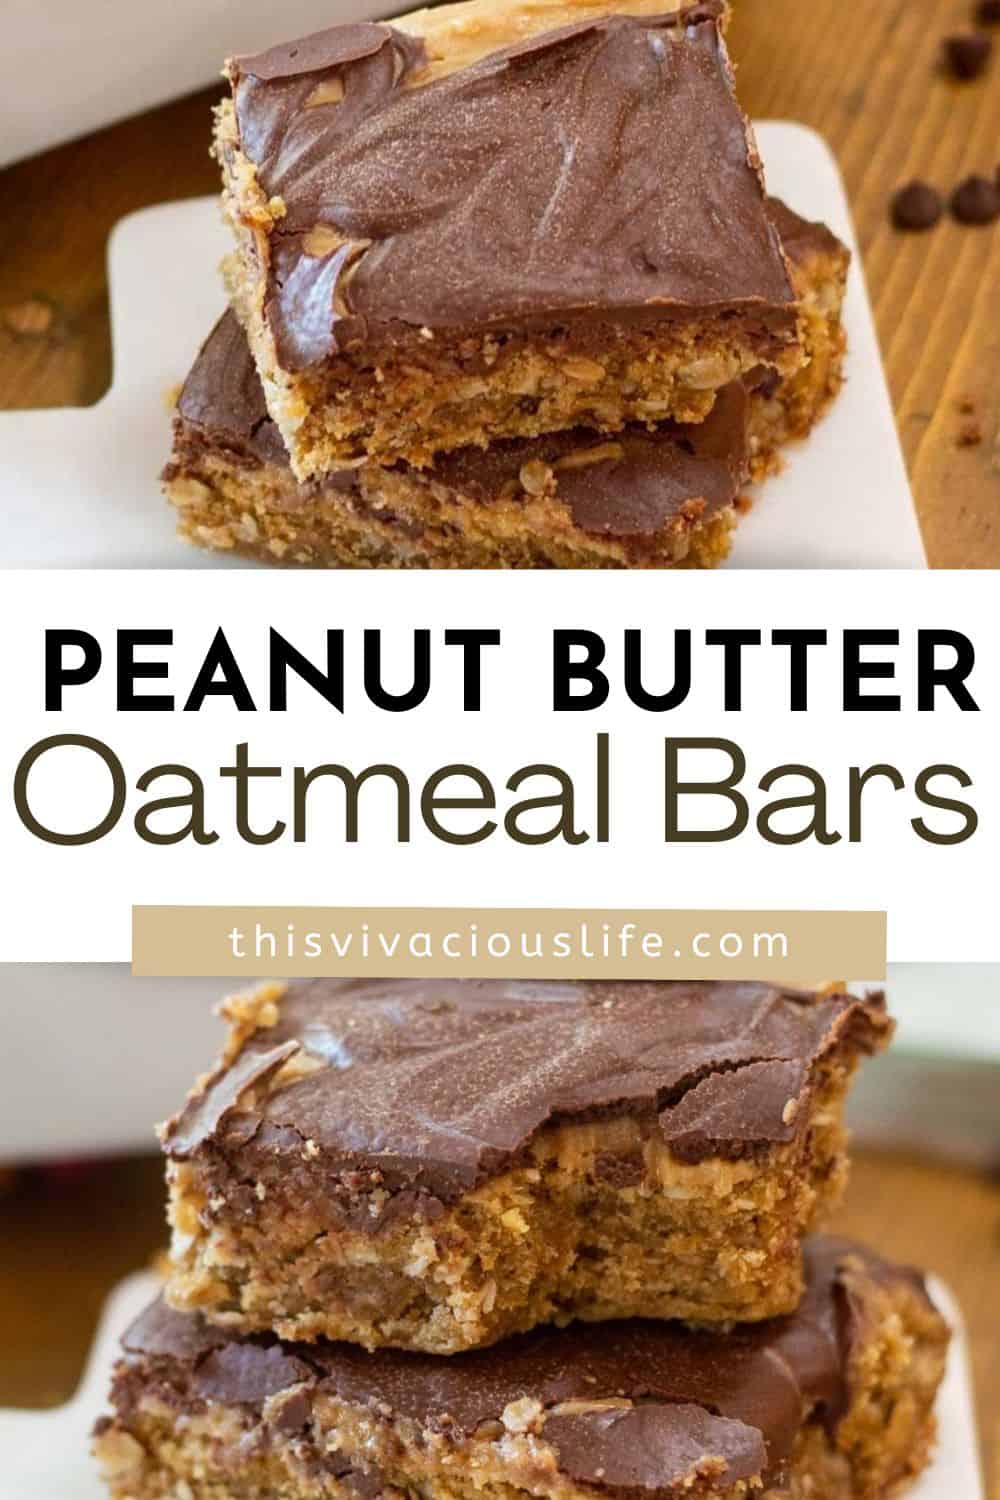 Peanut Butter Oatmeal Bars with Chocolate Peanut Butter Frosting